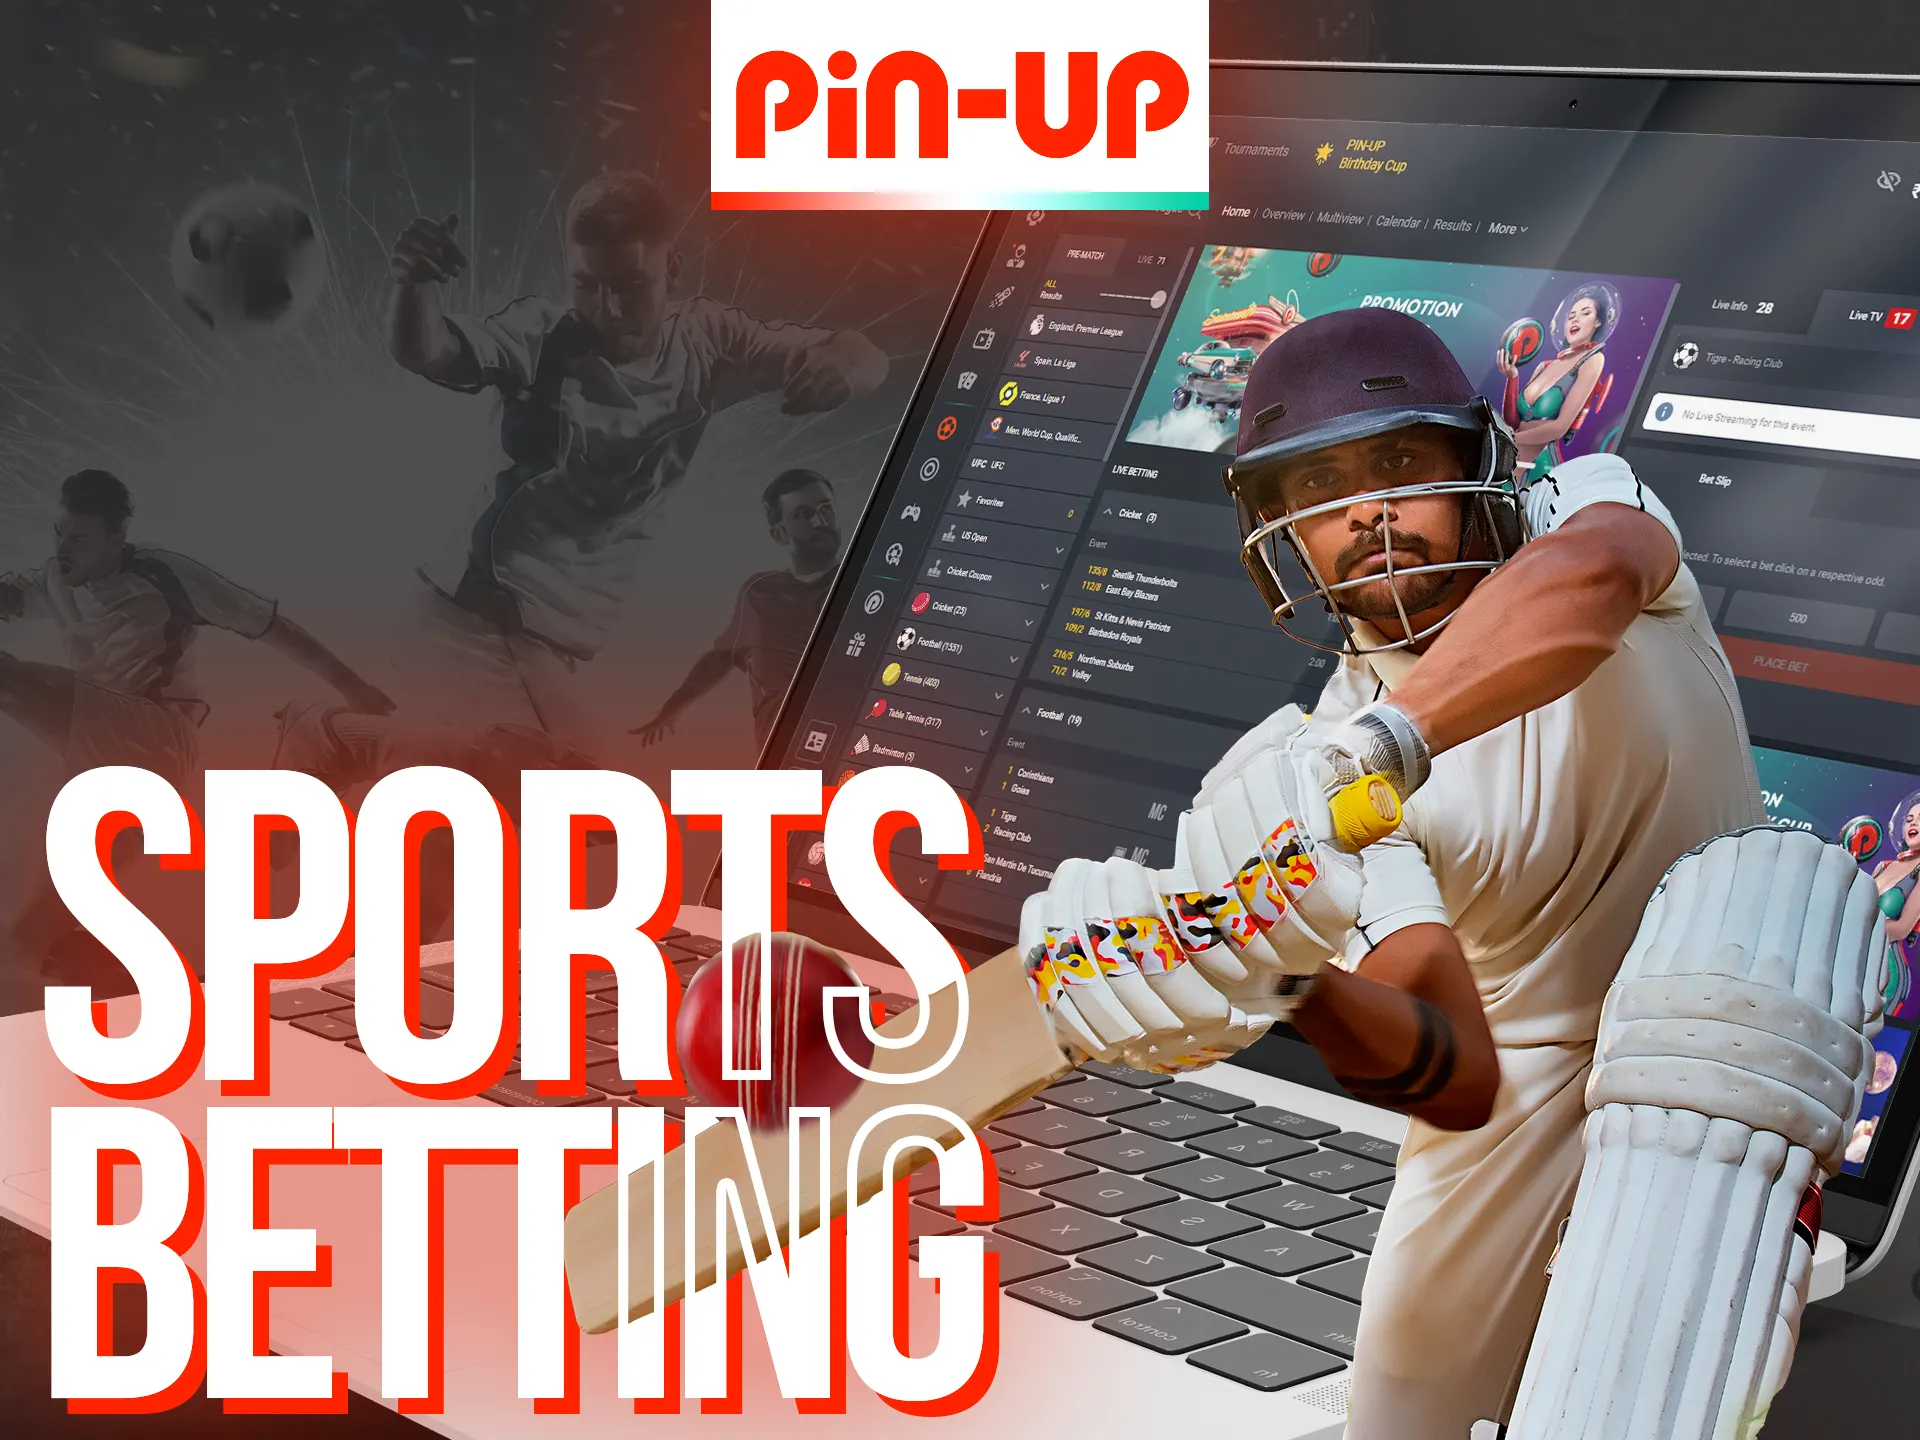 Place sports bets at Pin-Up.